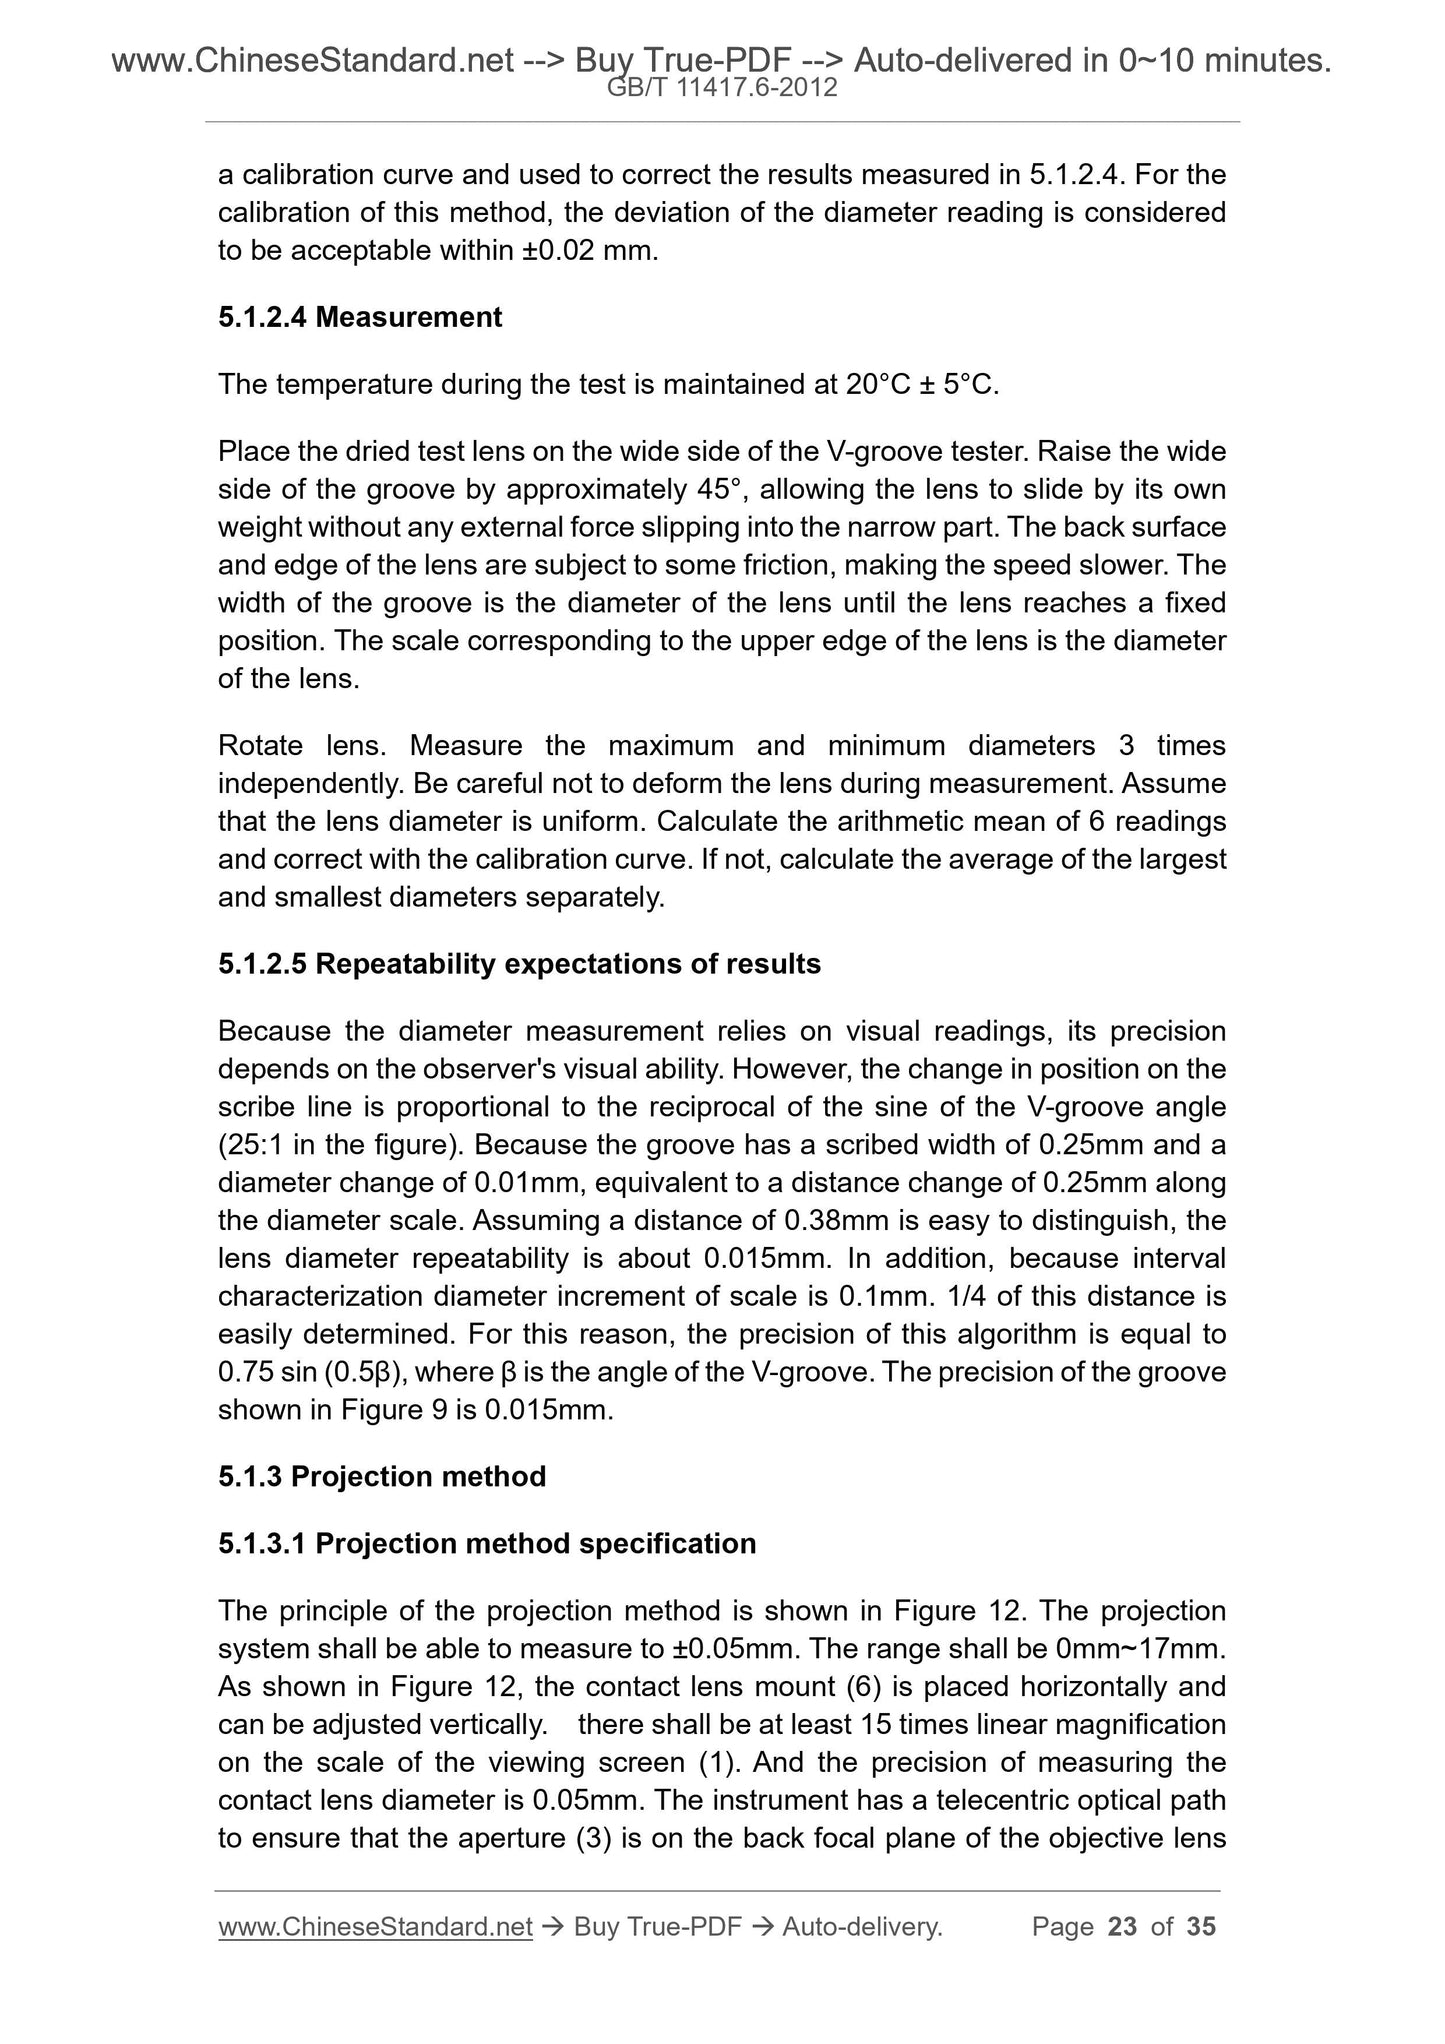 GB/T 11417.6-2012 Page 8